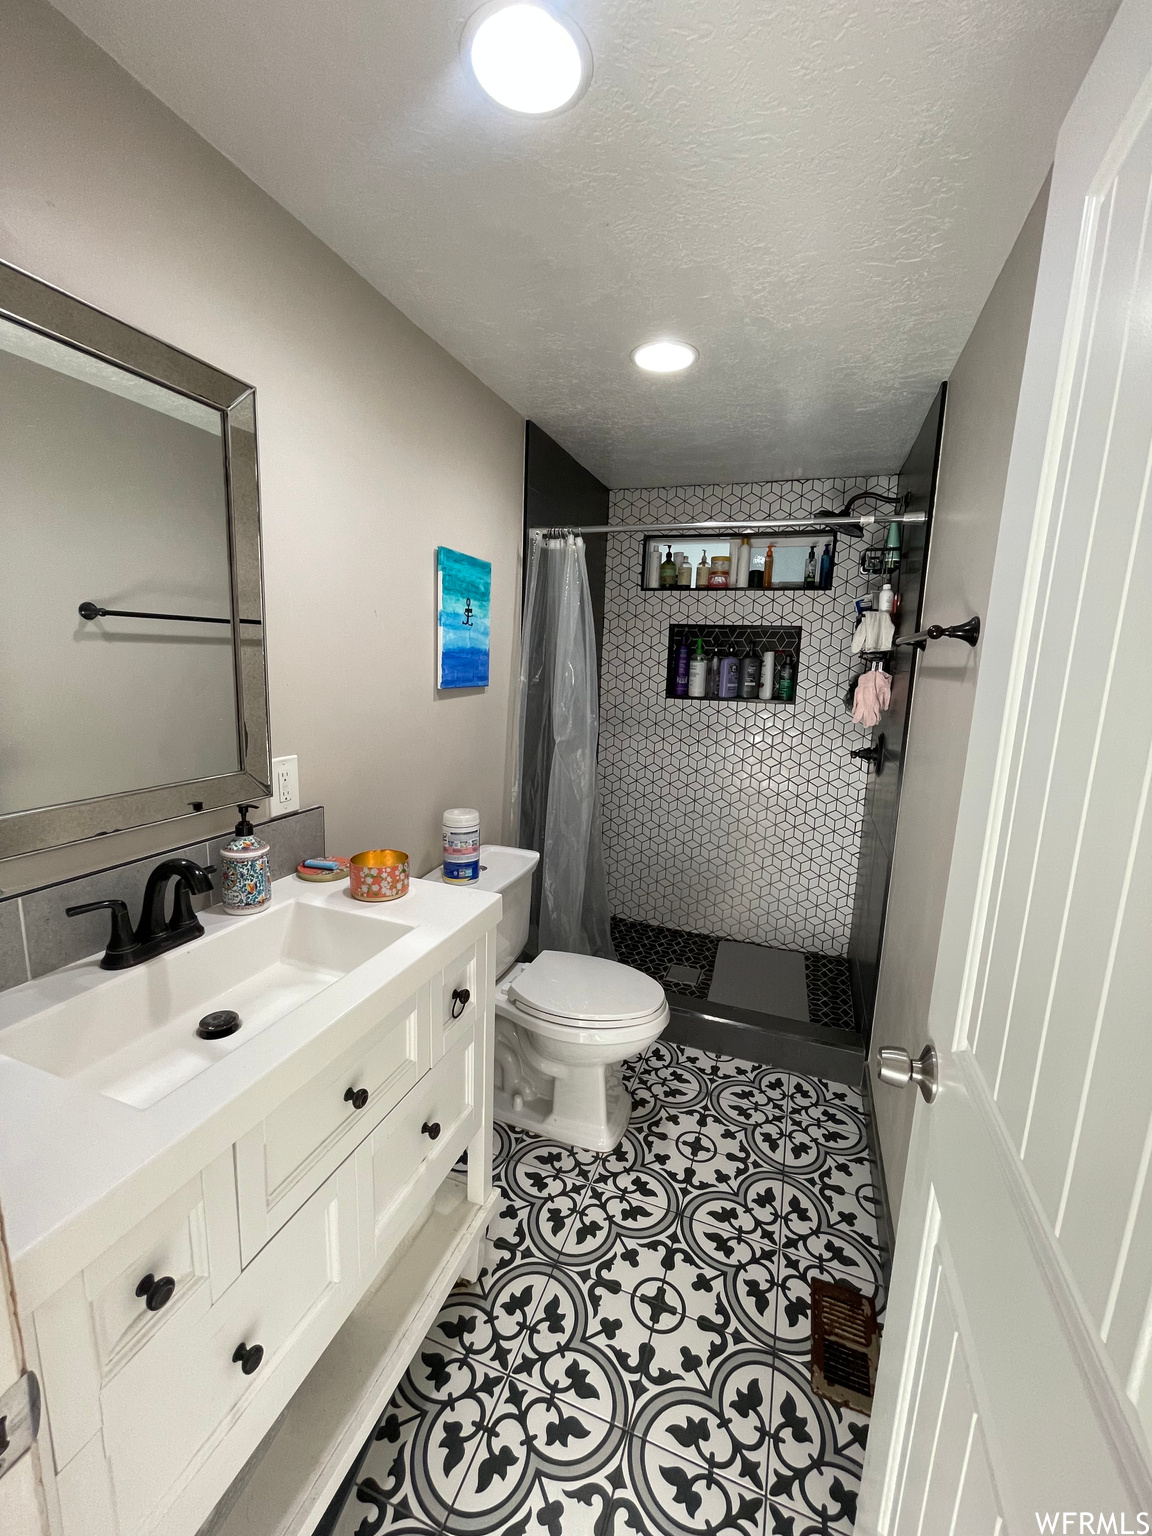 Bathroom featuring oversized vanity, a textured ceiling, toilet, and tile floors